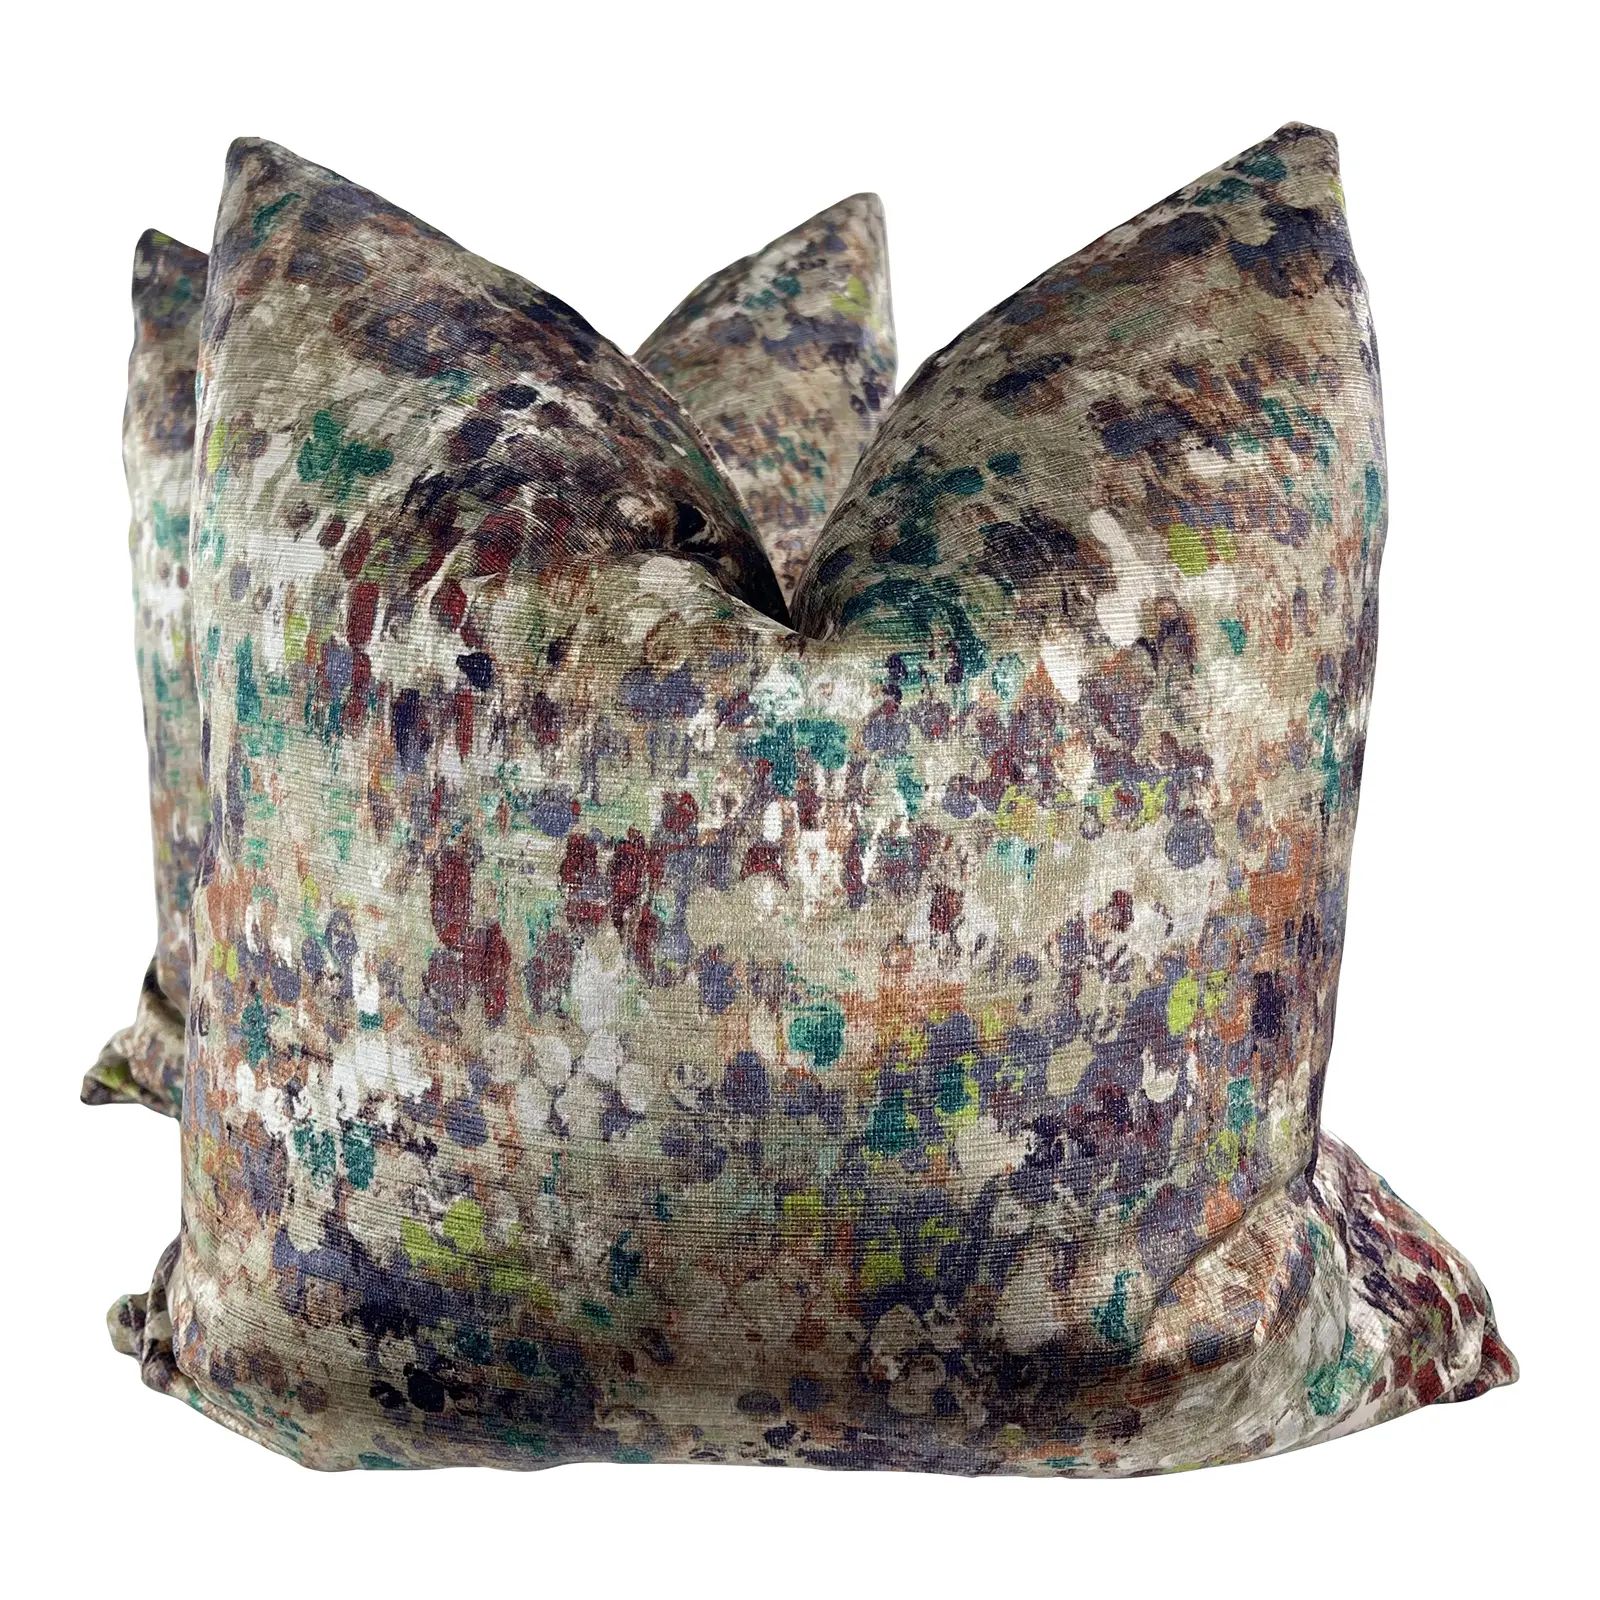 Kravet Couture "Painted Velvet" in Amethyst 22" Pillows-A Pair | Chairish